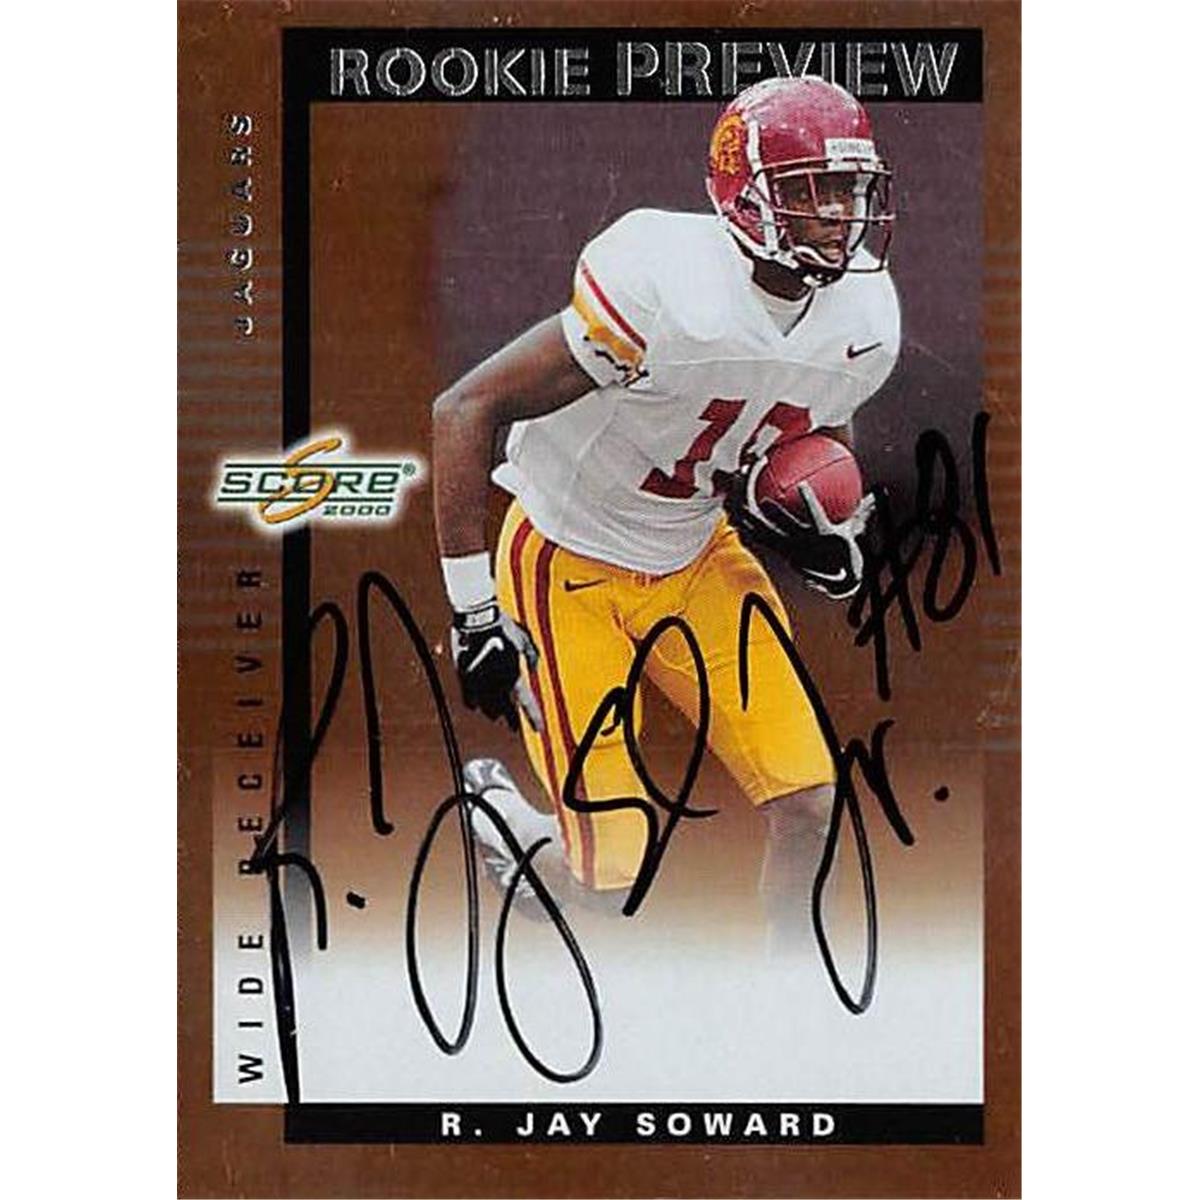 Picture of Autograph Warehouse 366592 R. Jay Soward Autographed Football Card - 2000 Score Rookie Preview SR19